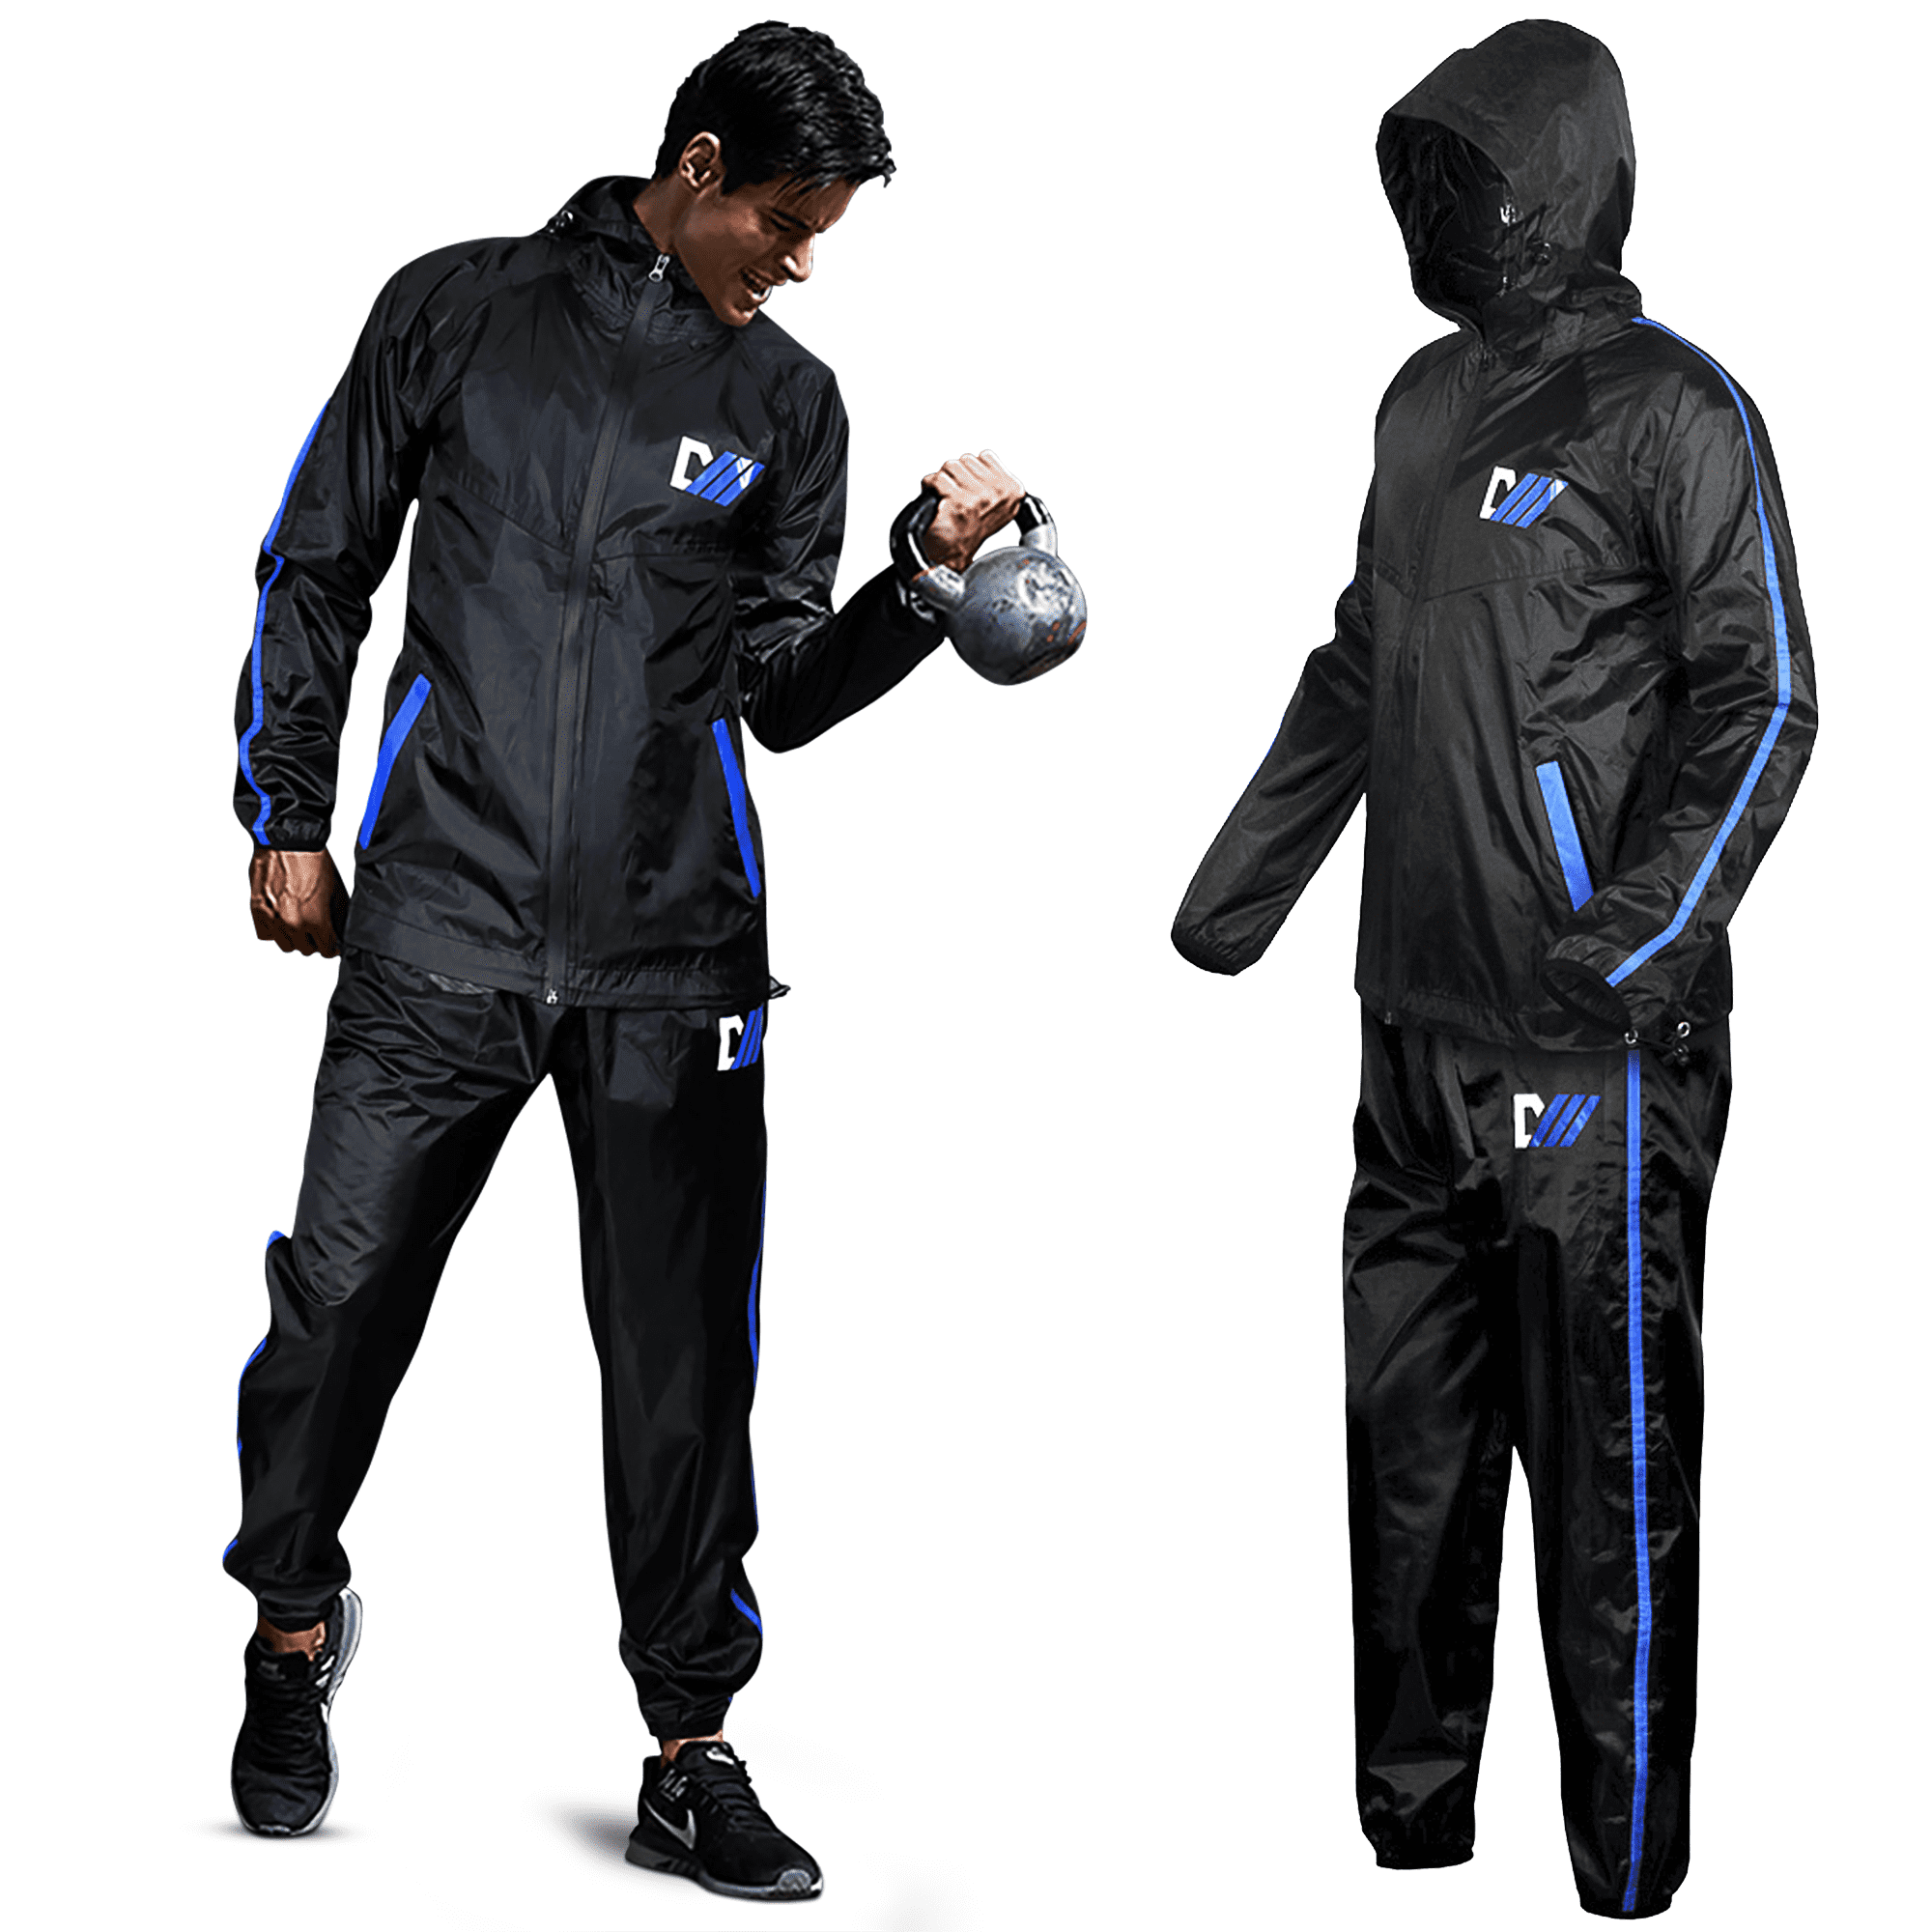 winning Food type Sauna suit Prize fighter specifications black x gold logo 